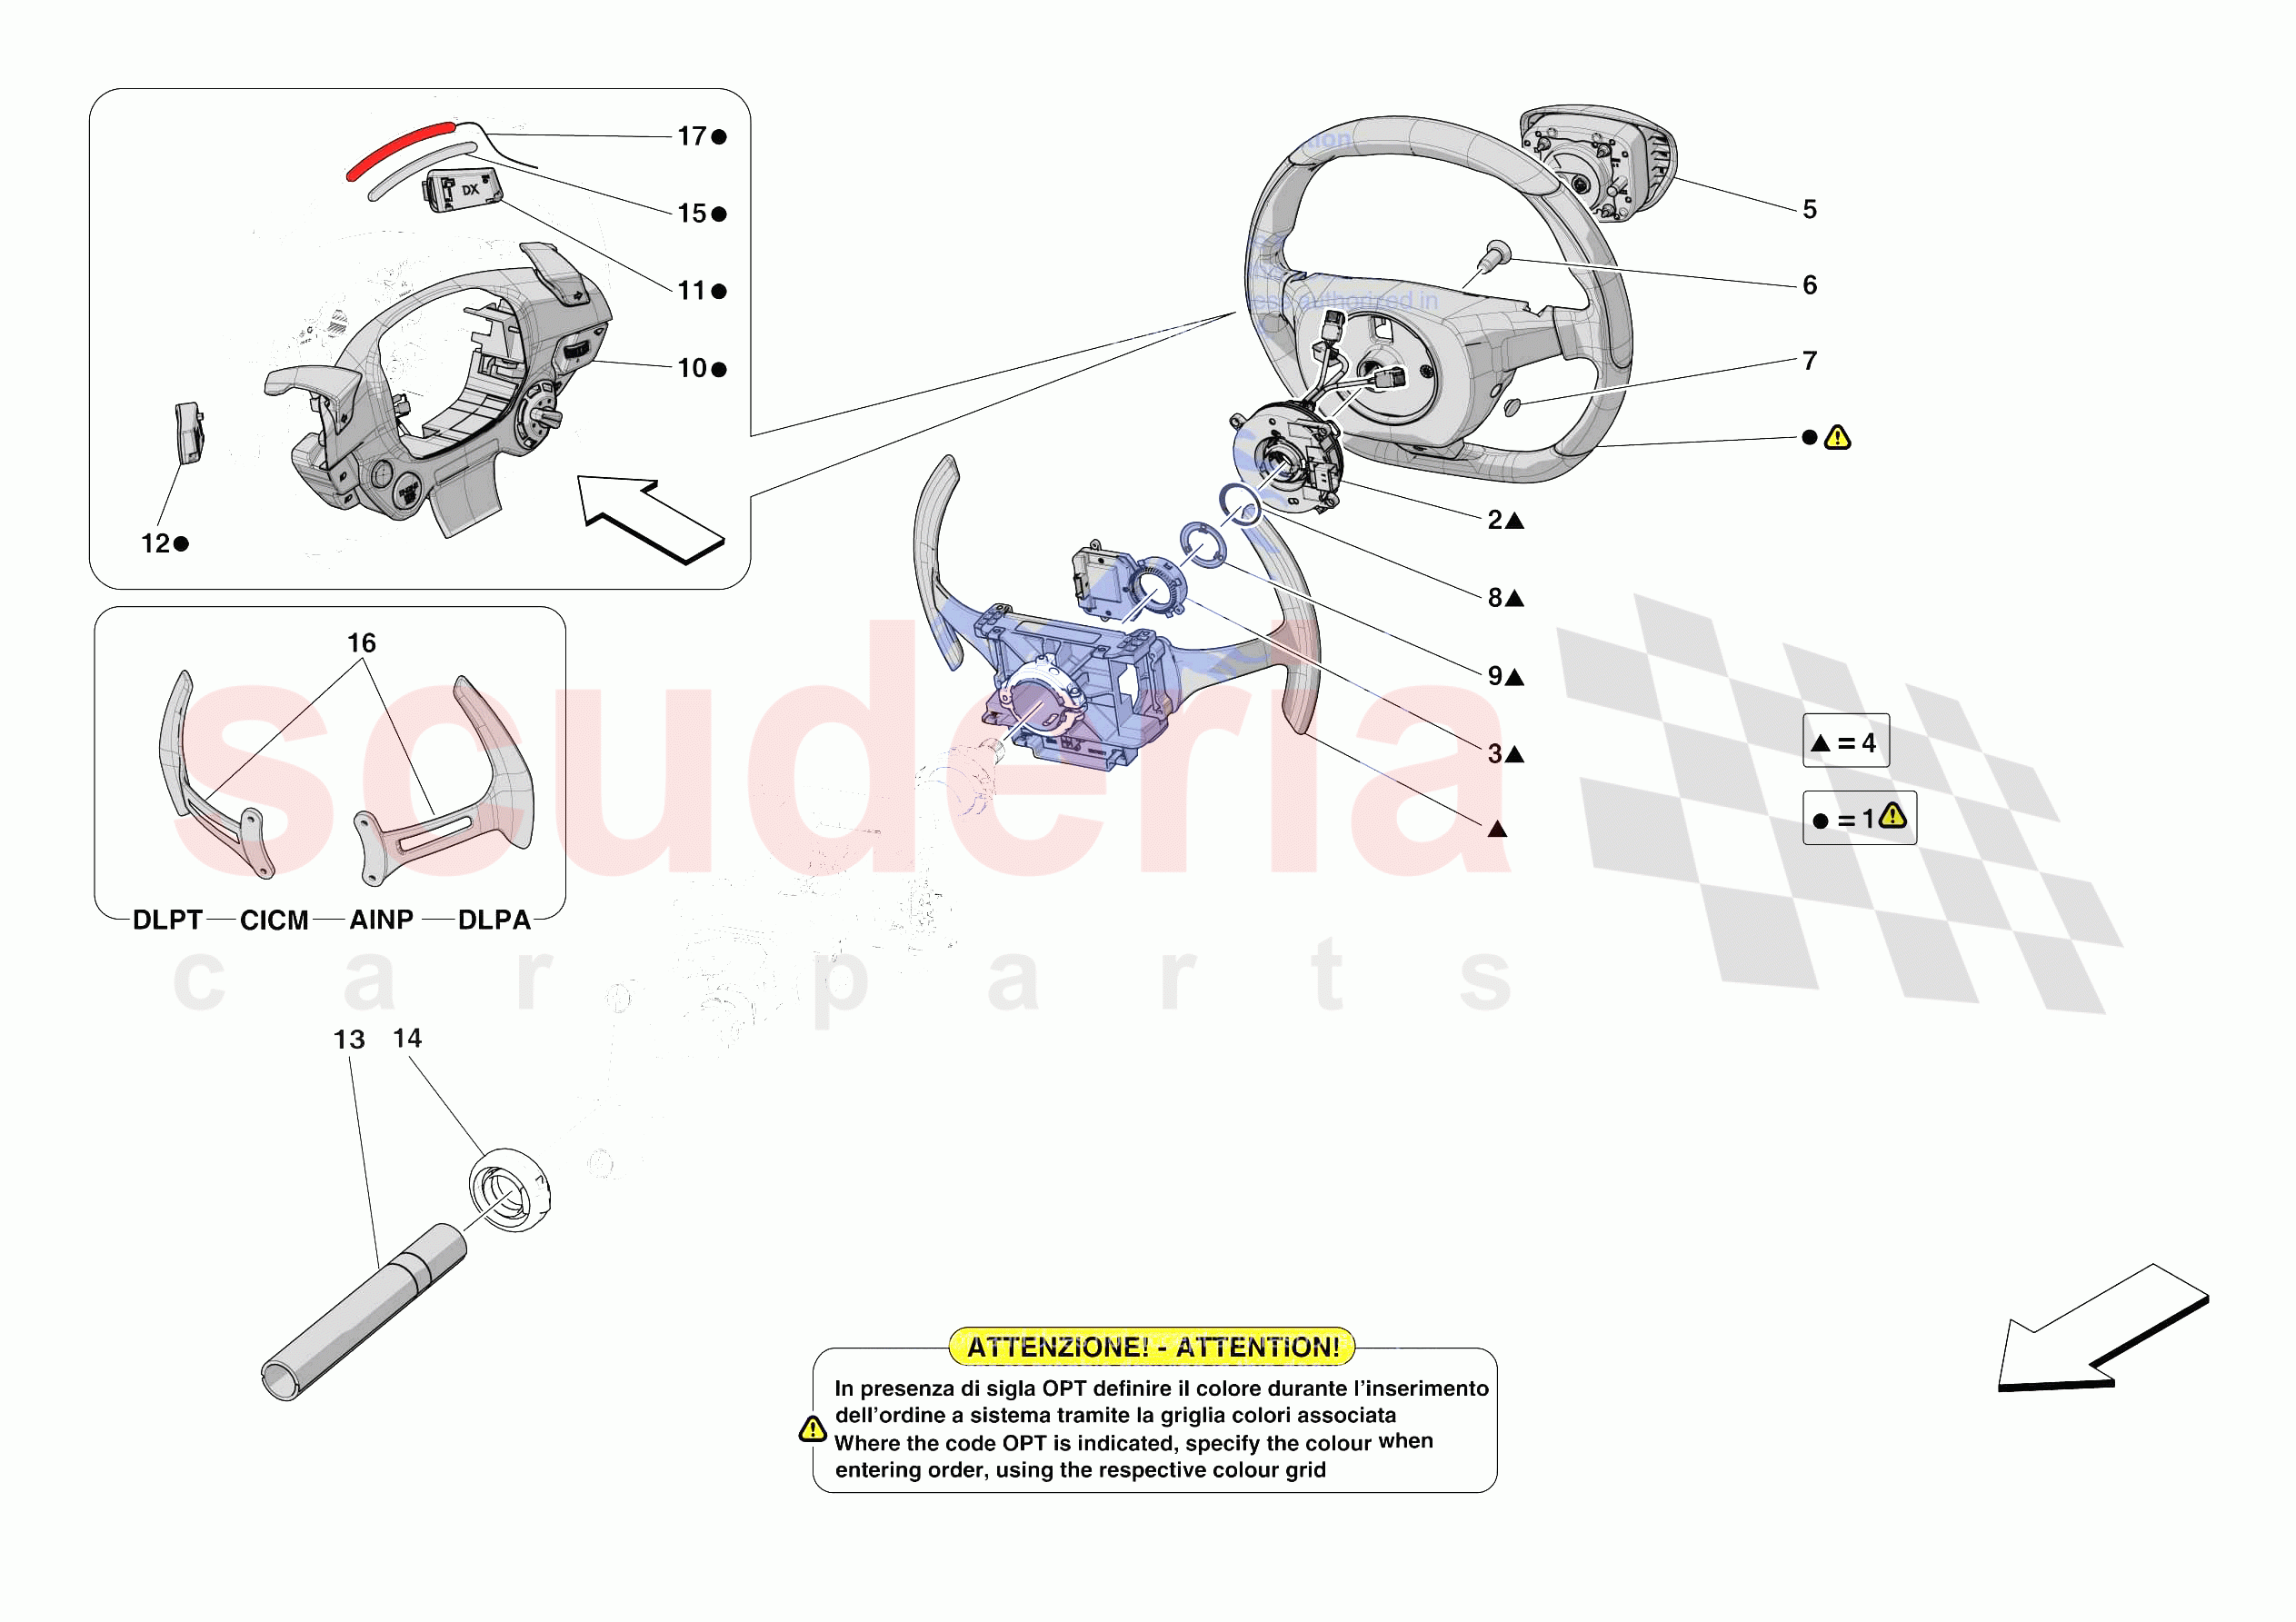 STEERING WHEEL AND STEERING SYSTEM - STEERING WHEEL AND AIRBAG of Ferrari Ferrari 812 Competizione USA